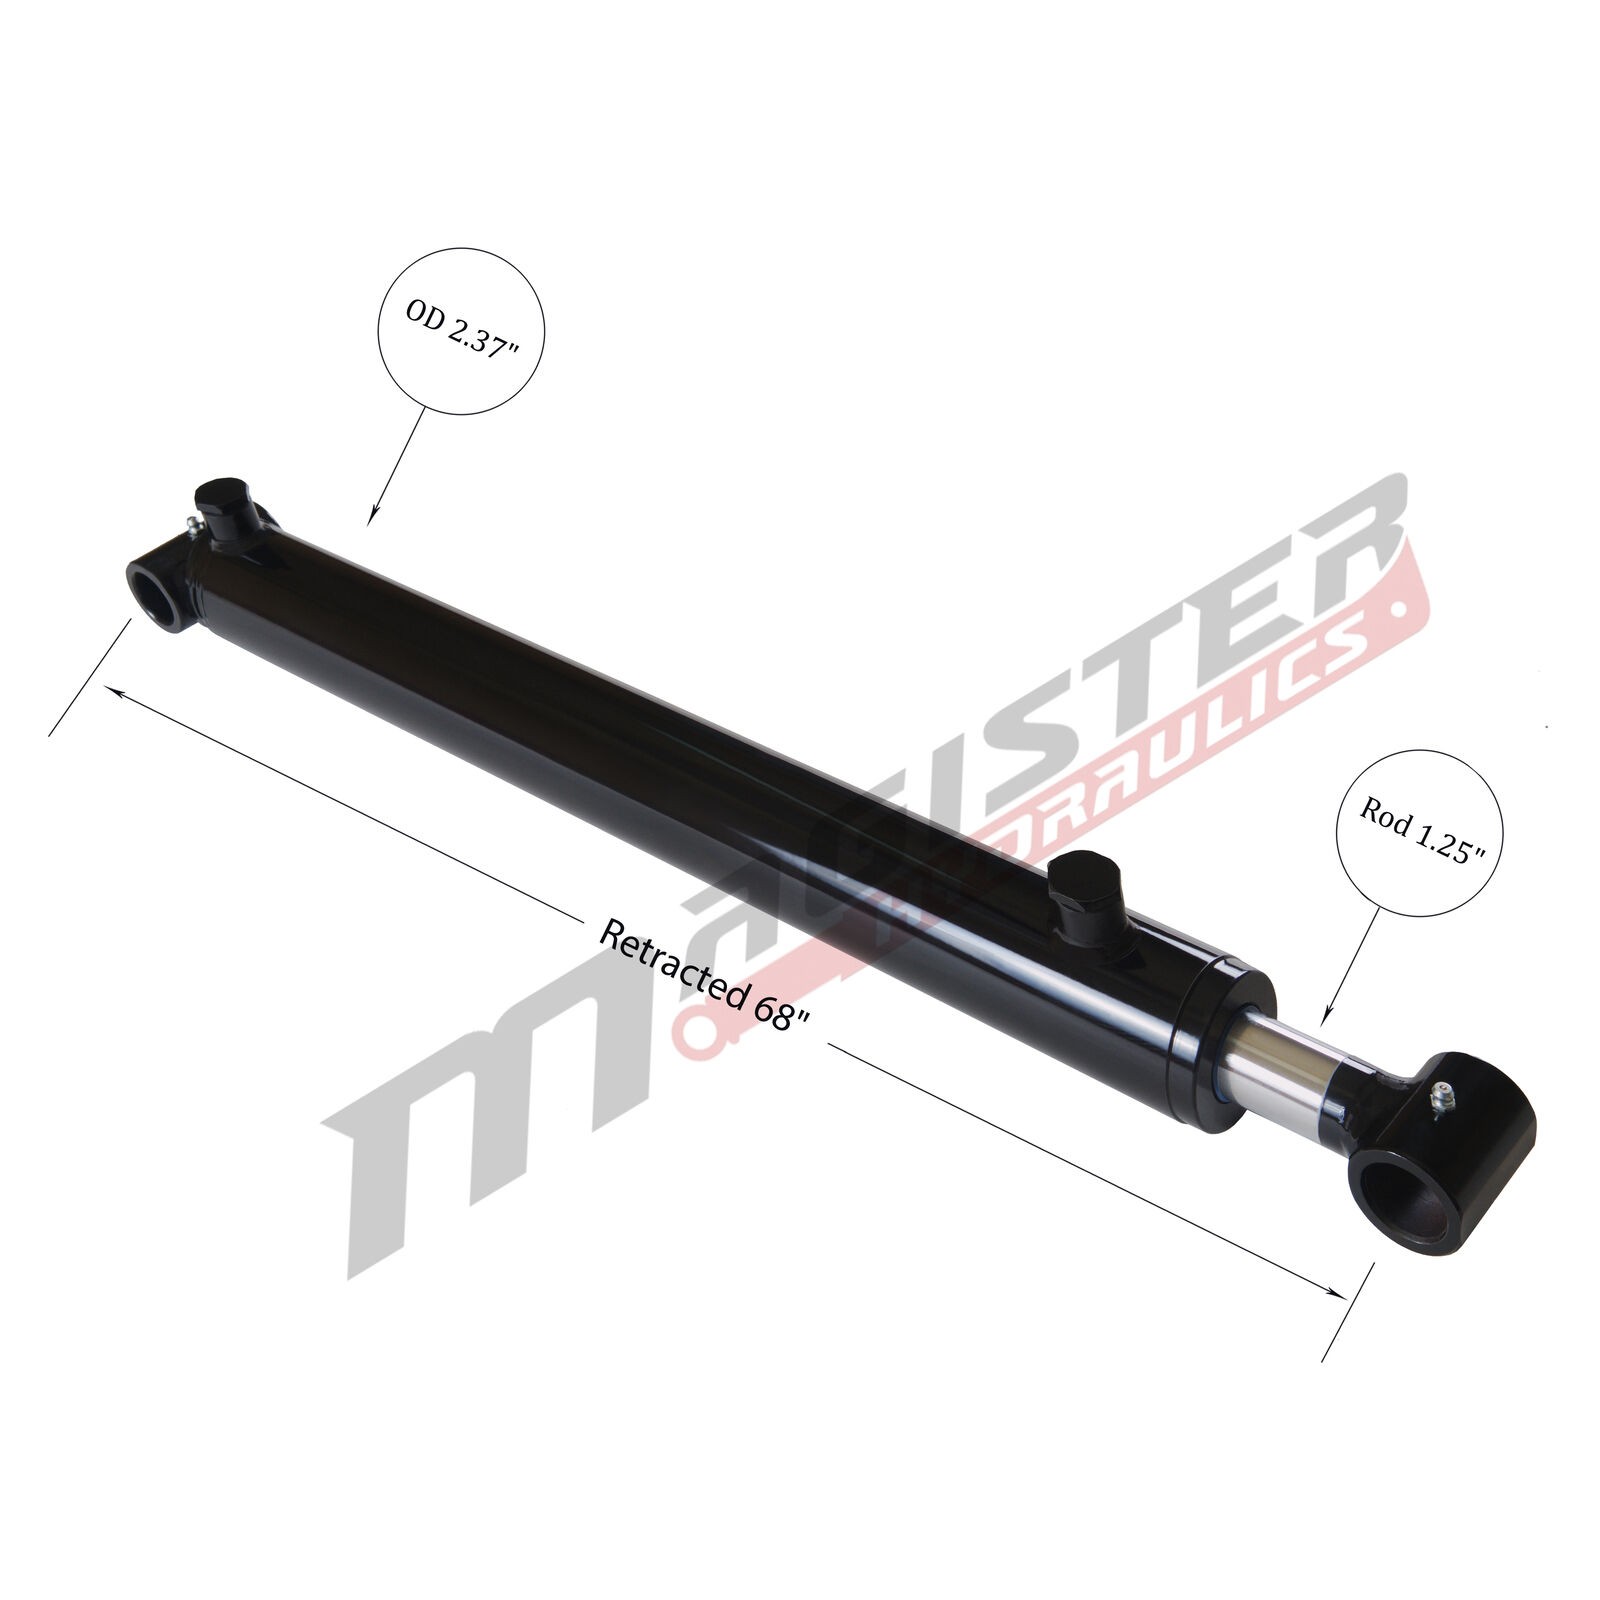 2.5 bore x 60 stroke hydraulic cylinder, welded cross tube double acting cylinder | Magister Hydraulics